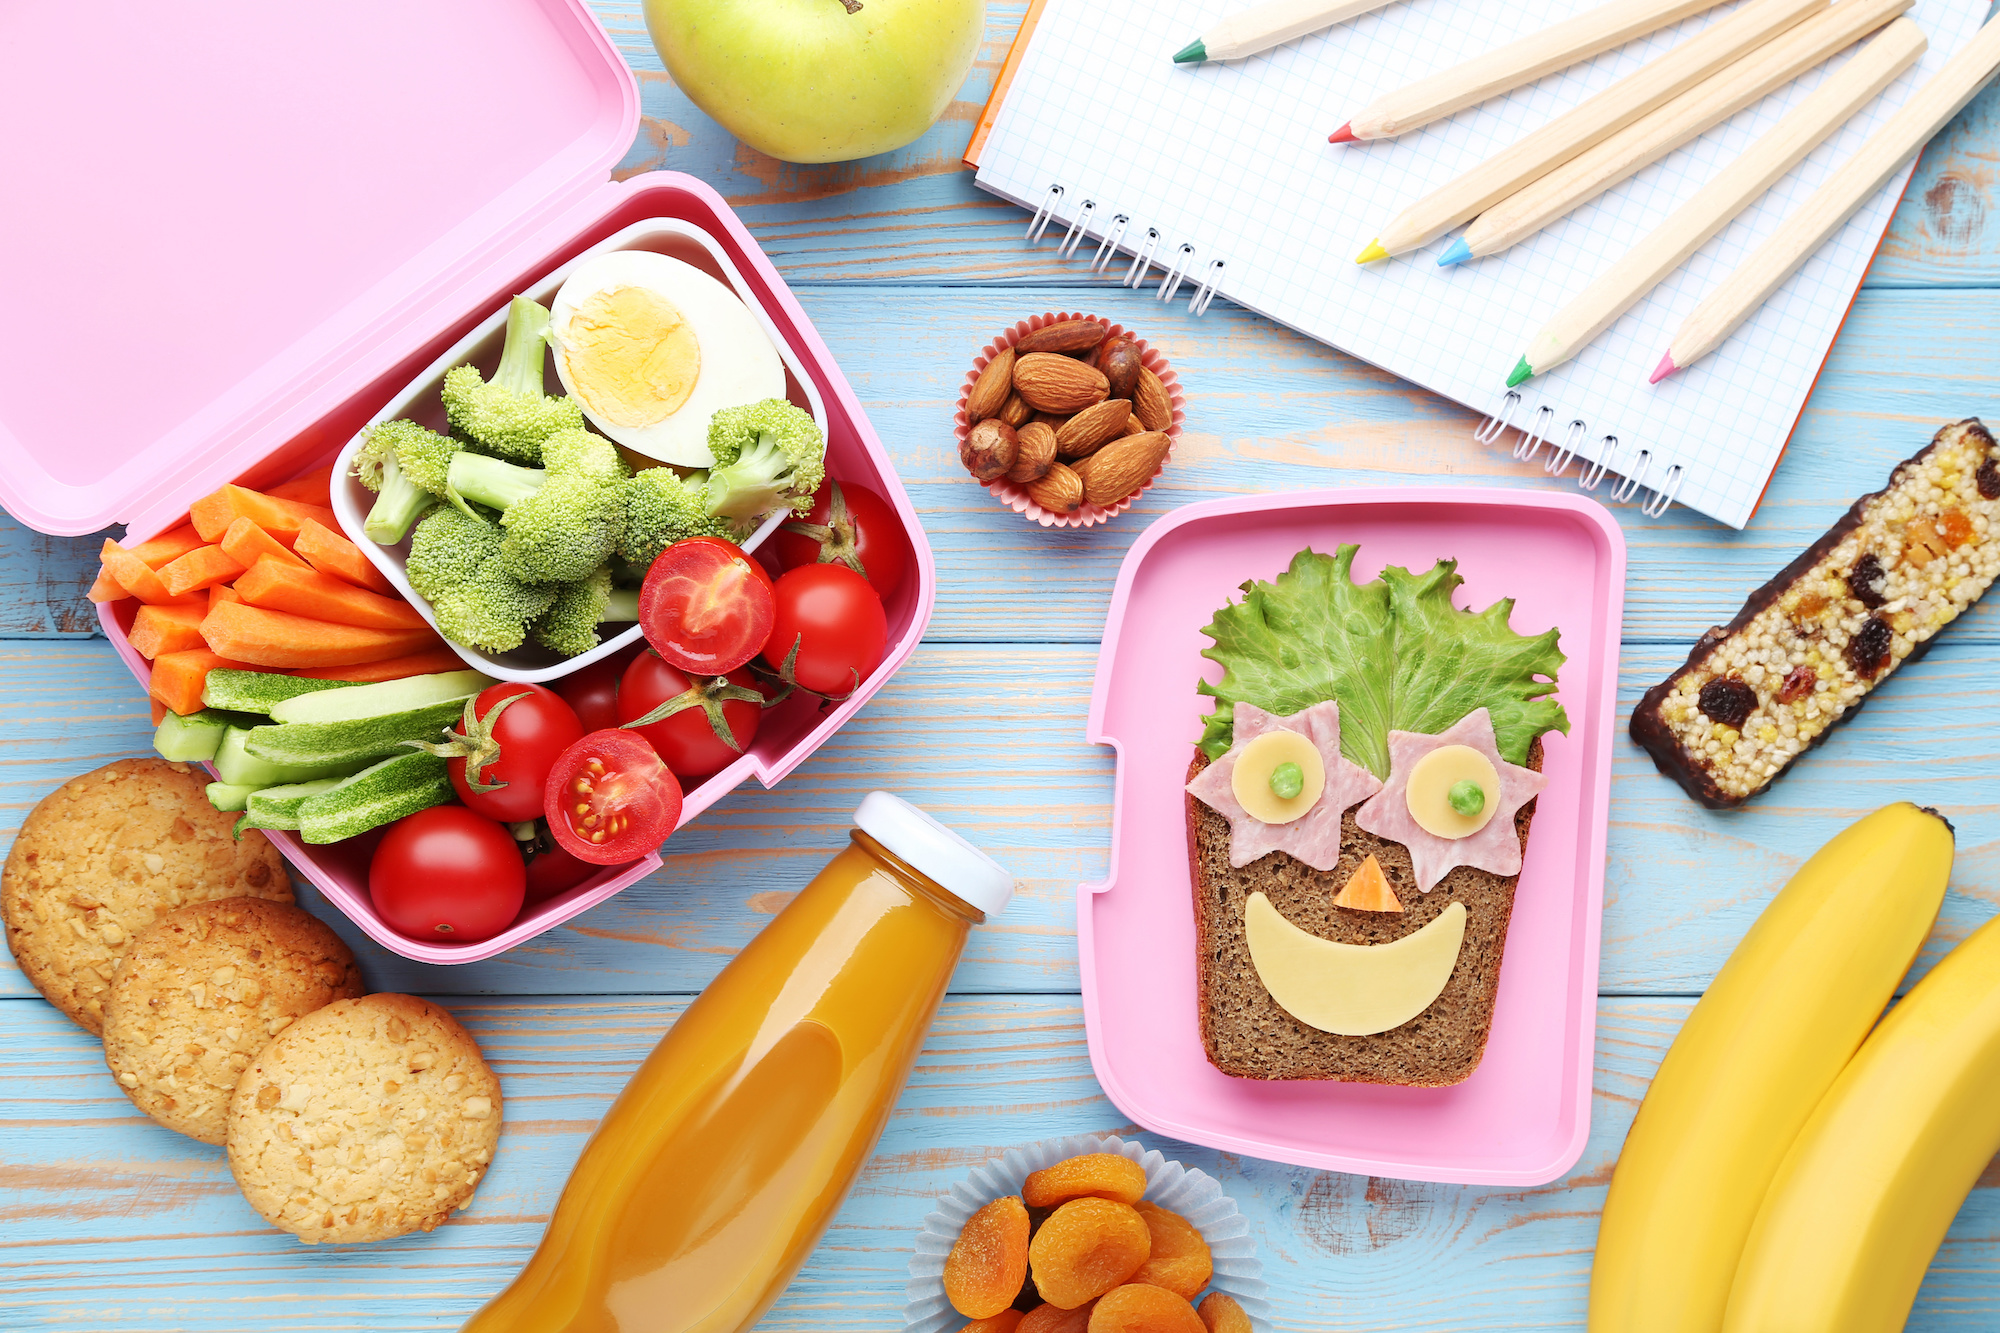 https://mandypatterson.com/wp-content/uploads/2019/12/healthy-school-lunch-ideas-for-busy-moms.jpeg